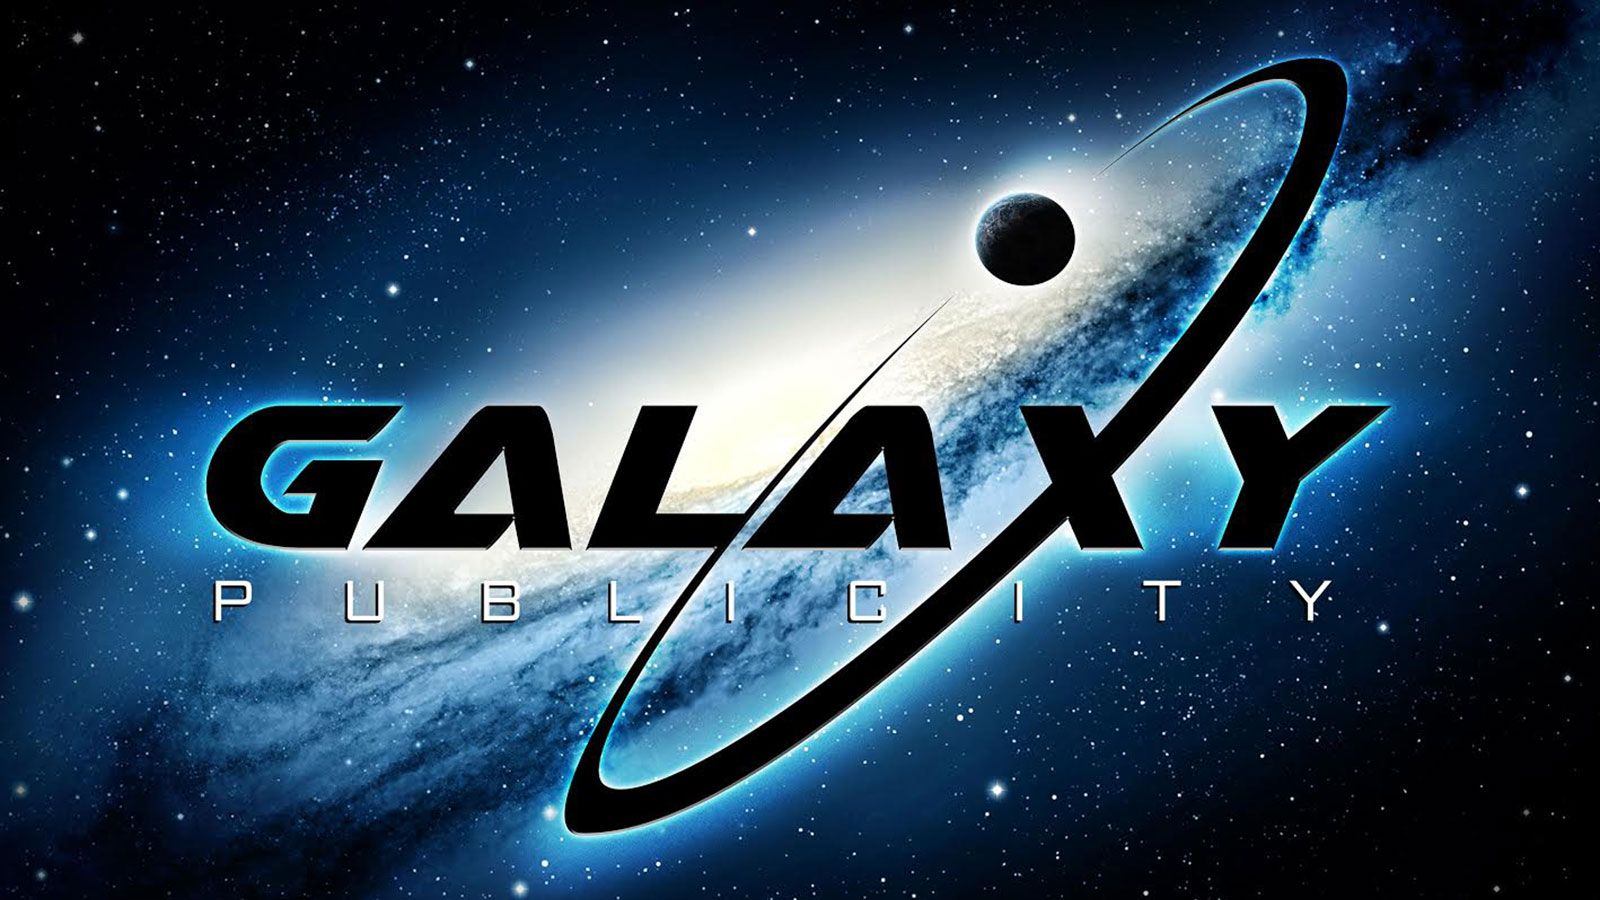 Galaxy Publicity Announces Star Signing Schedule at AEE